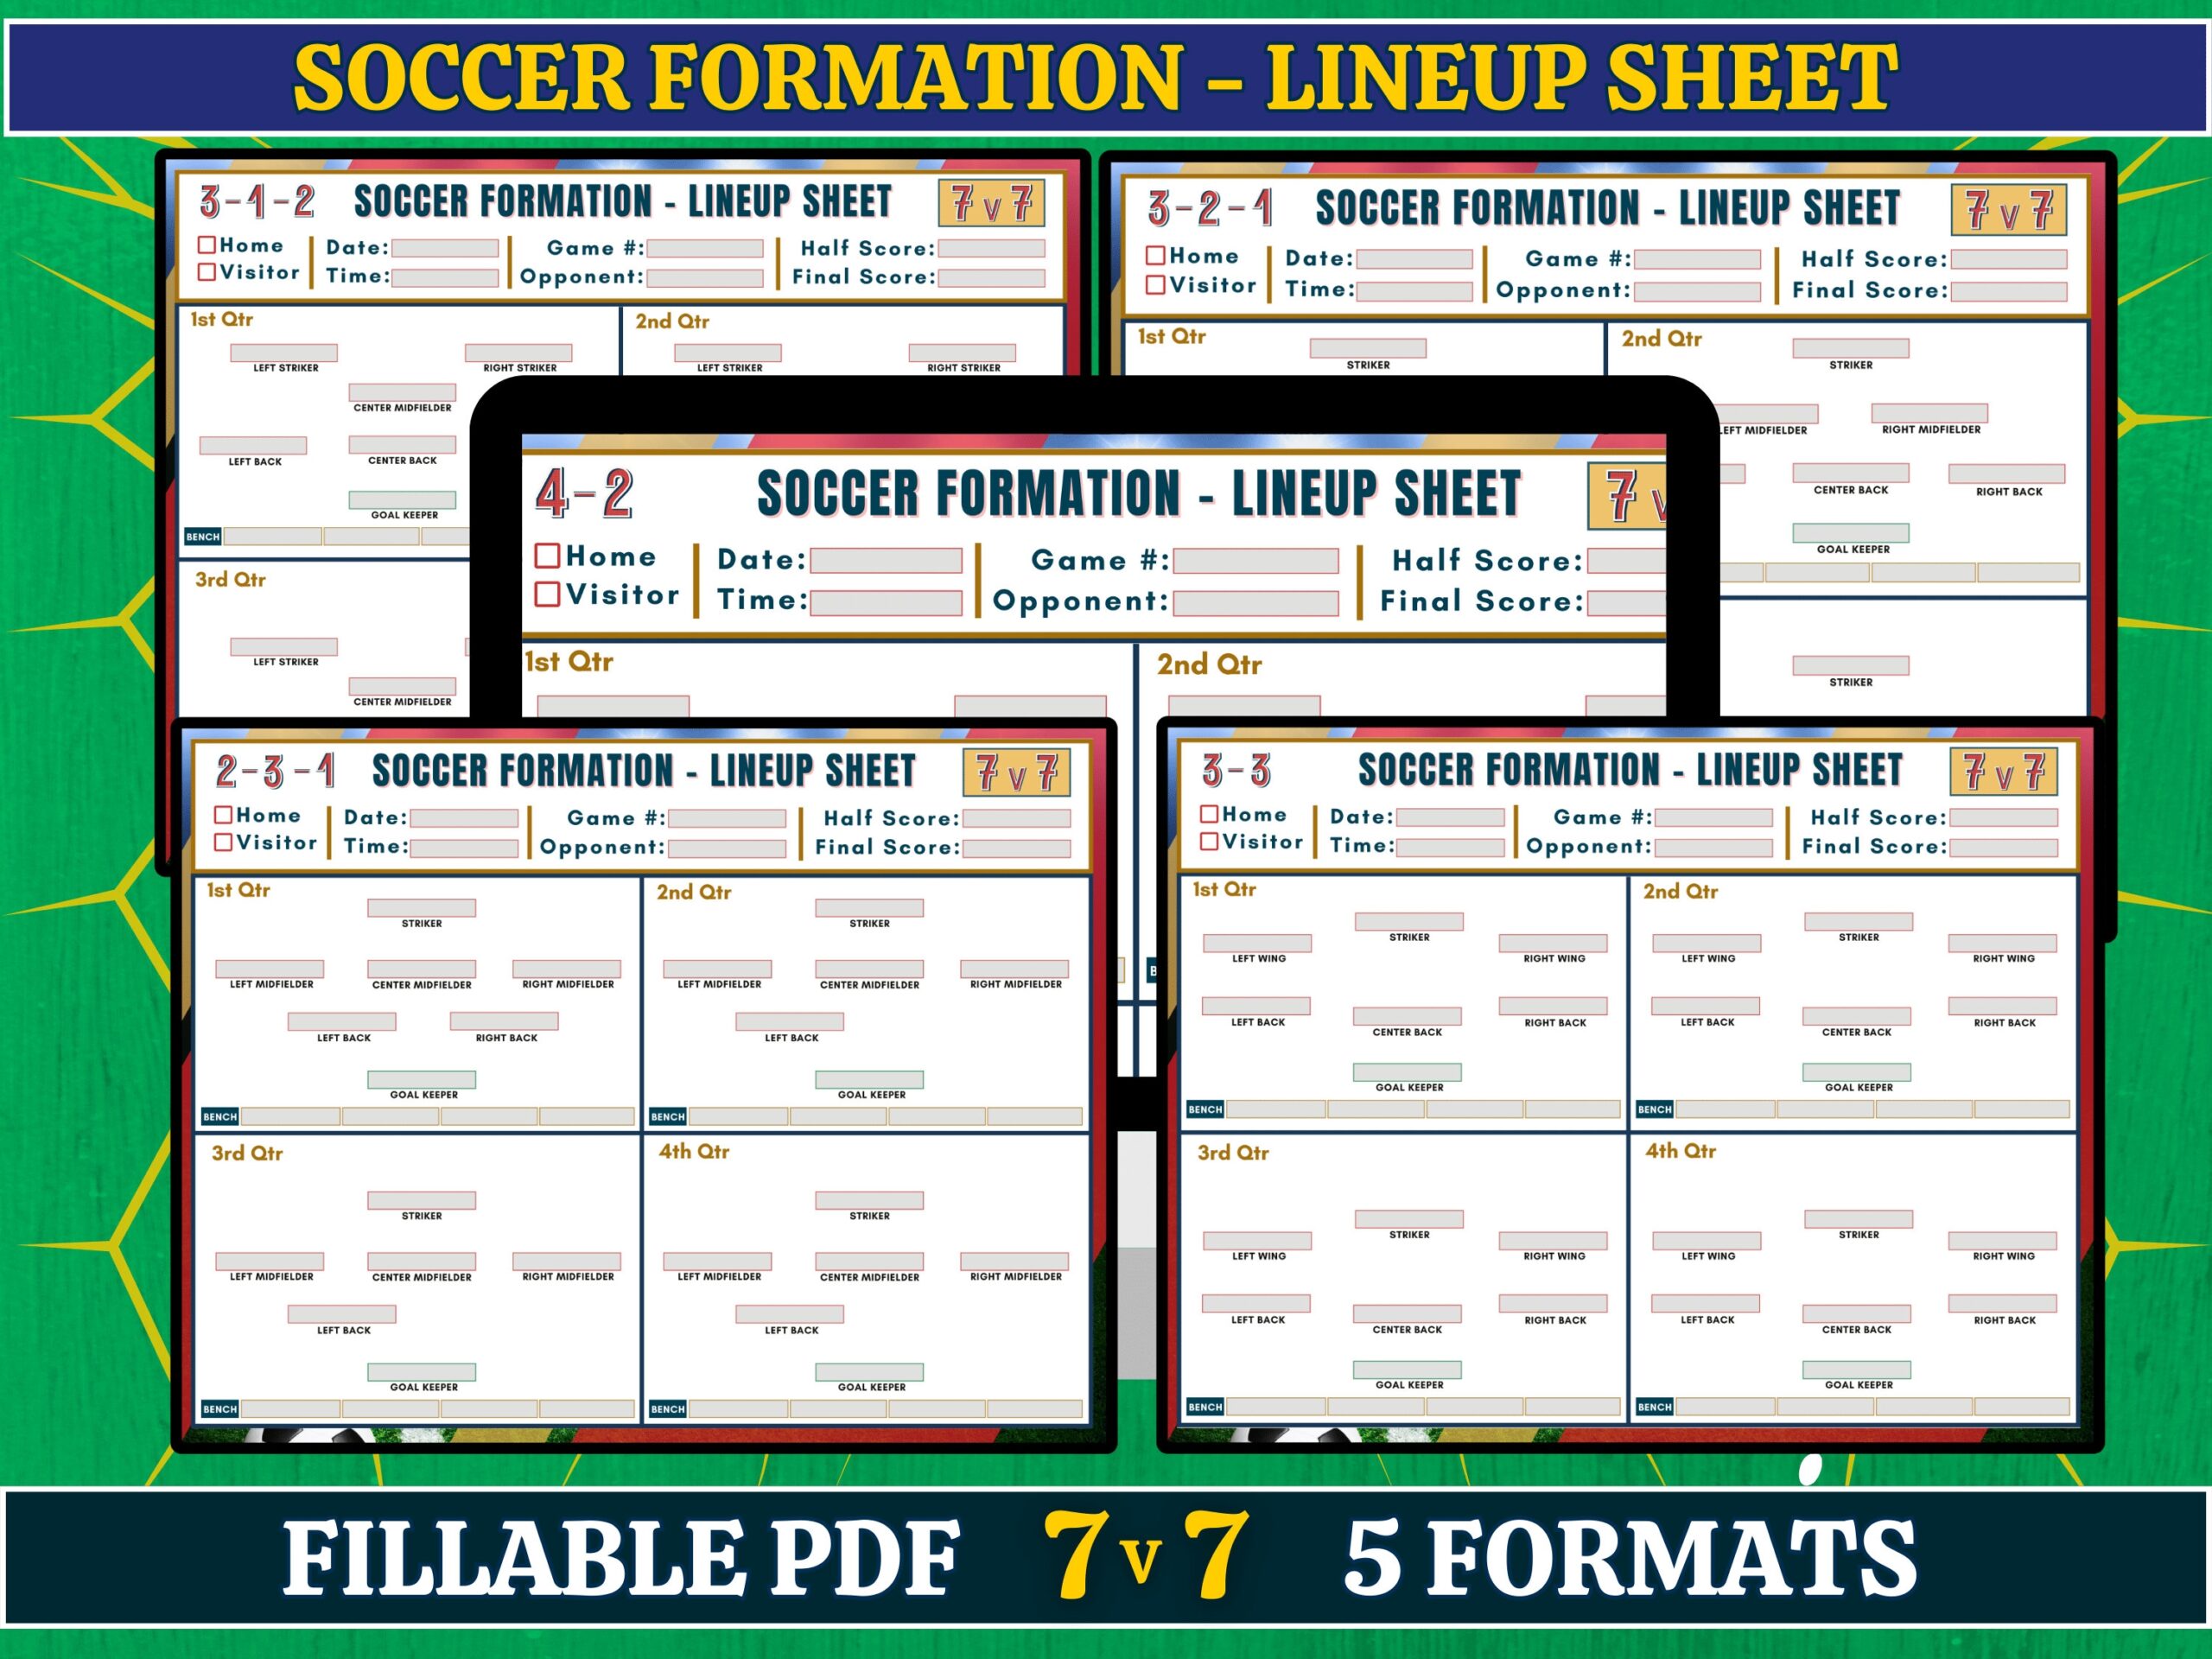 7v7 Soccer Formation Lineup Sheet Editable PDF Soccer Training Football Formation Soccer Coach Planner Youth Soccer Printable Template Etsy Norway